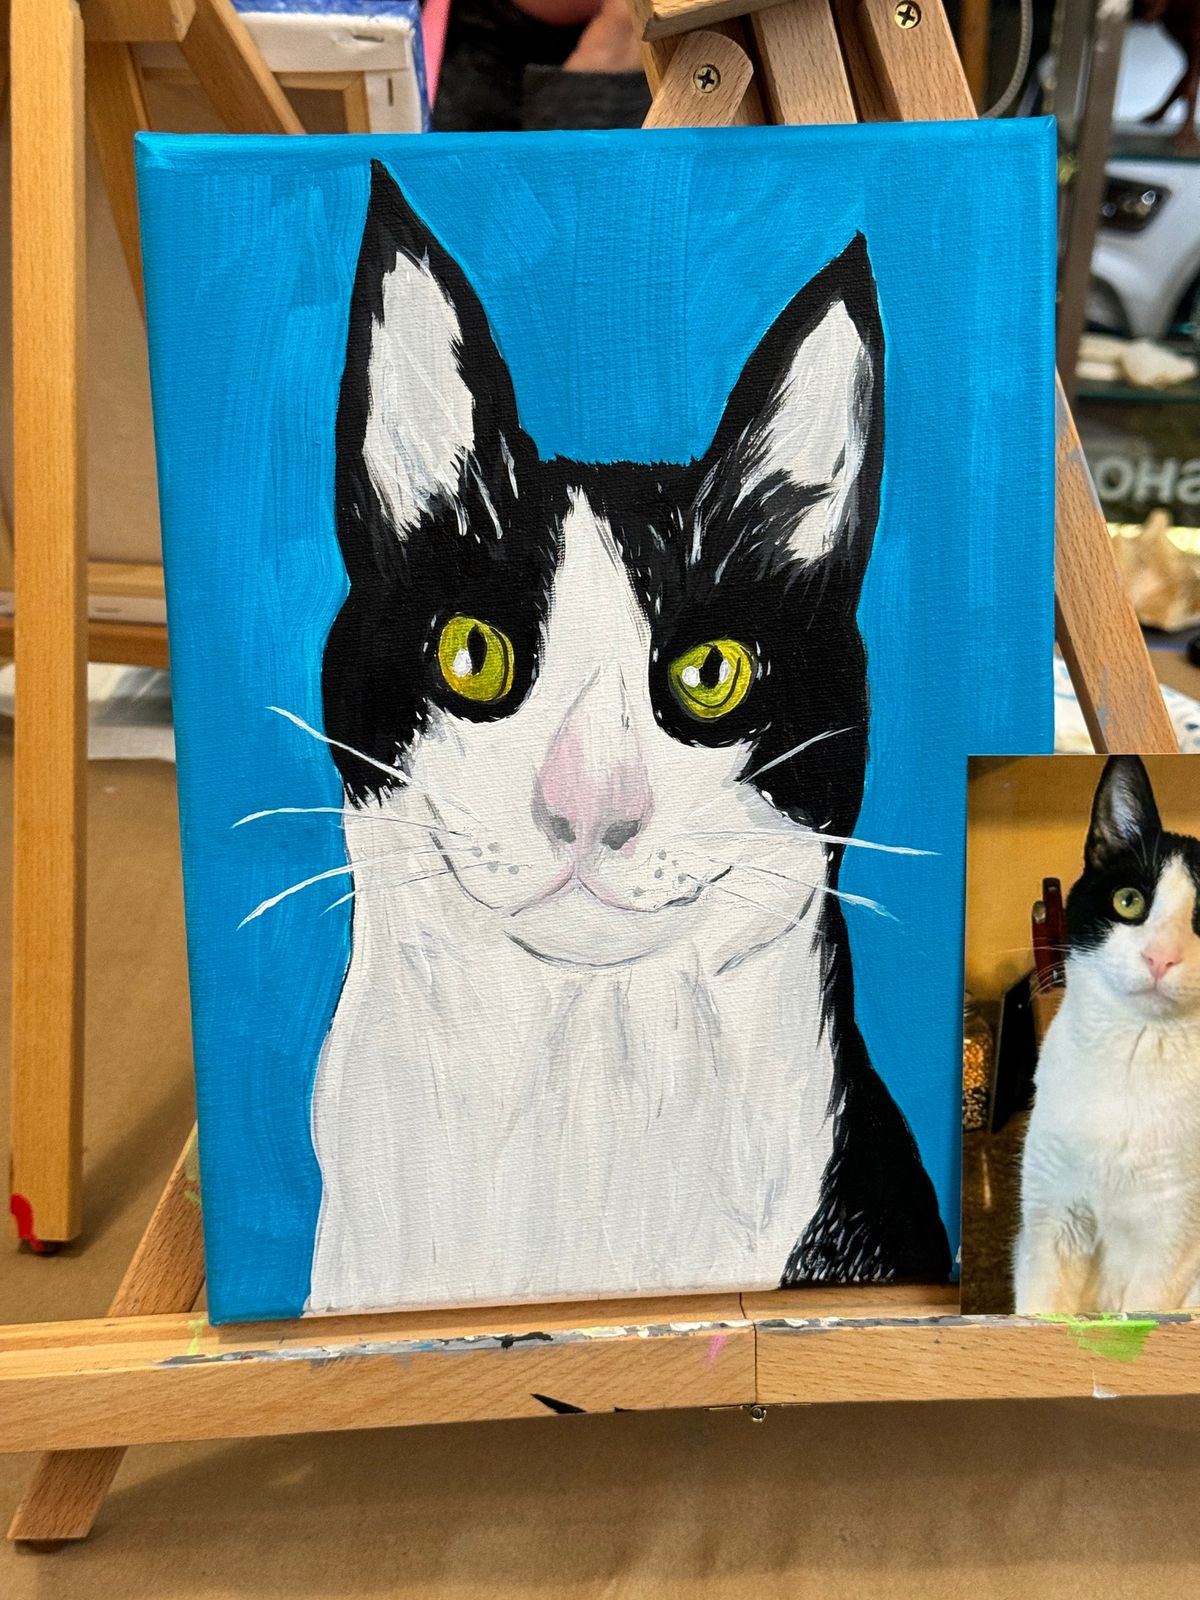 PAINT YOUR PET Class at Box Hill!